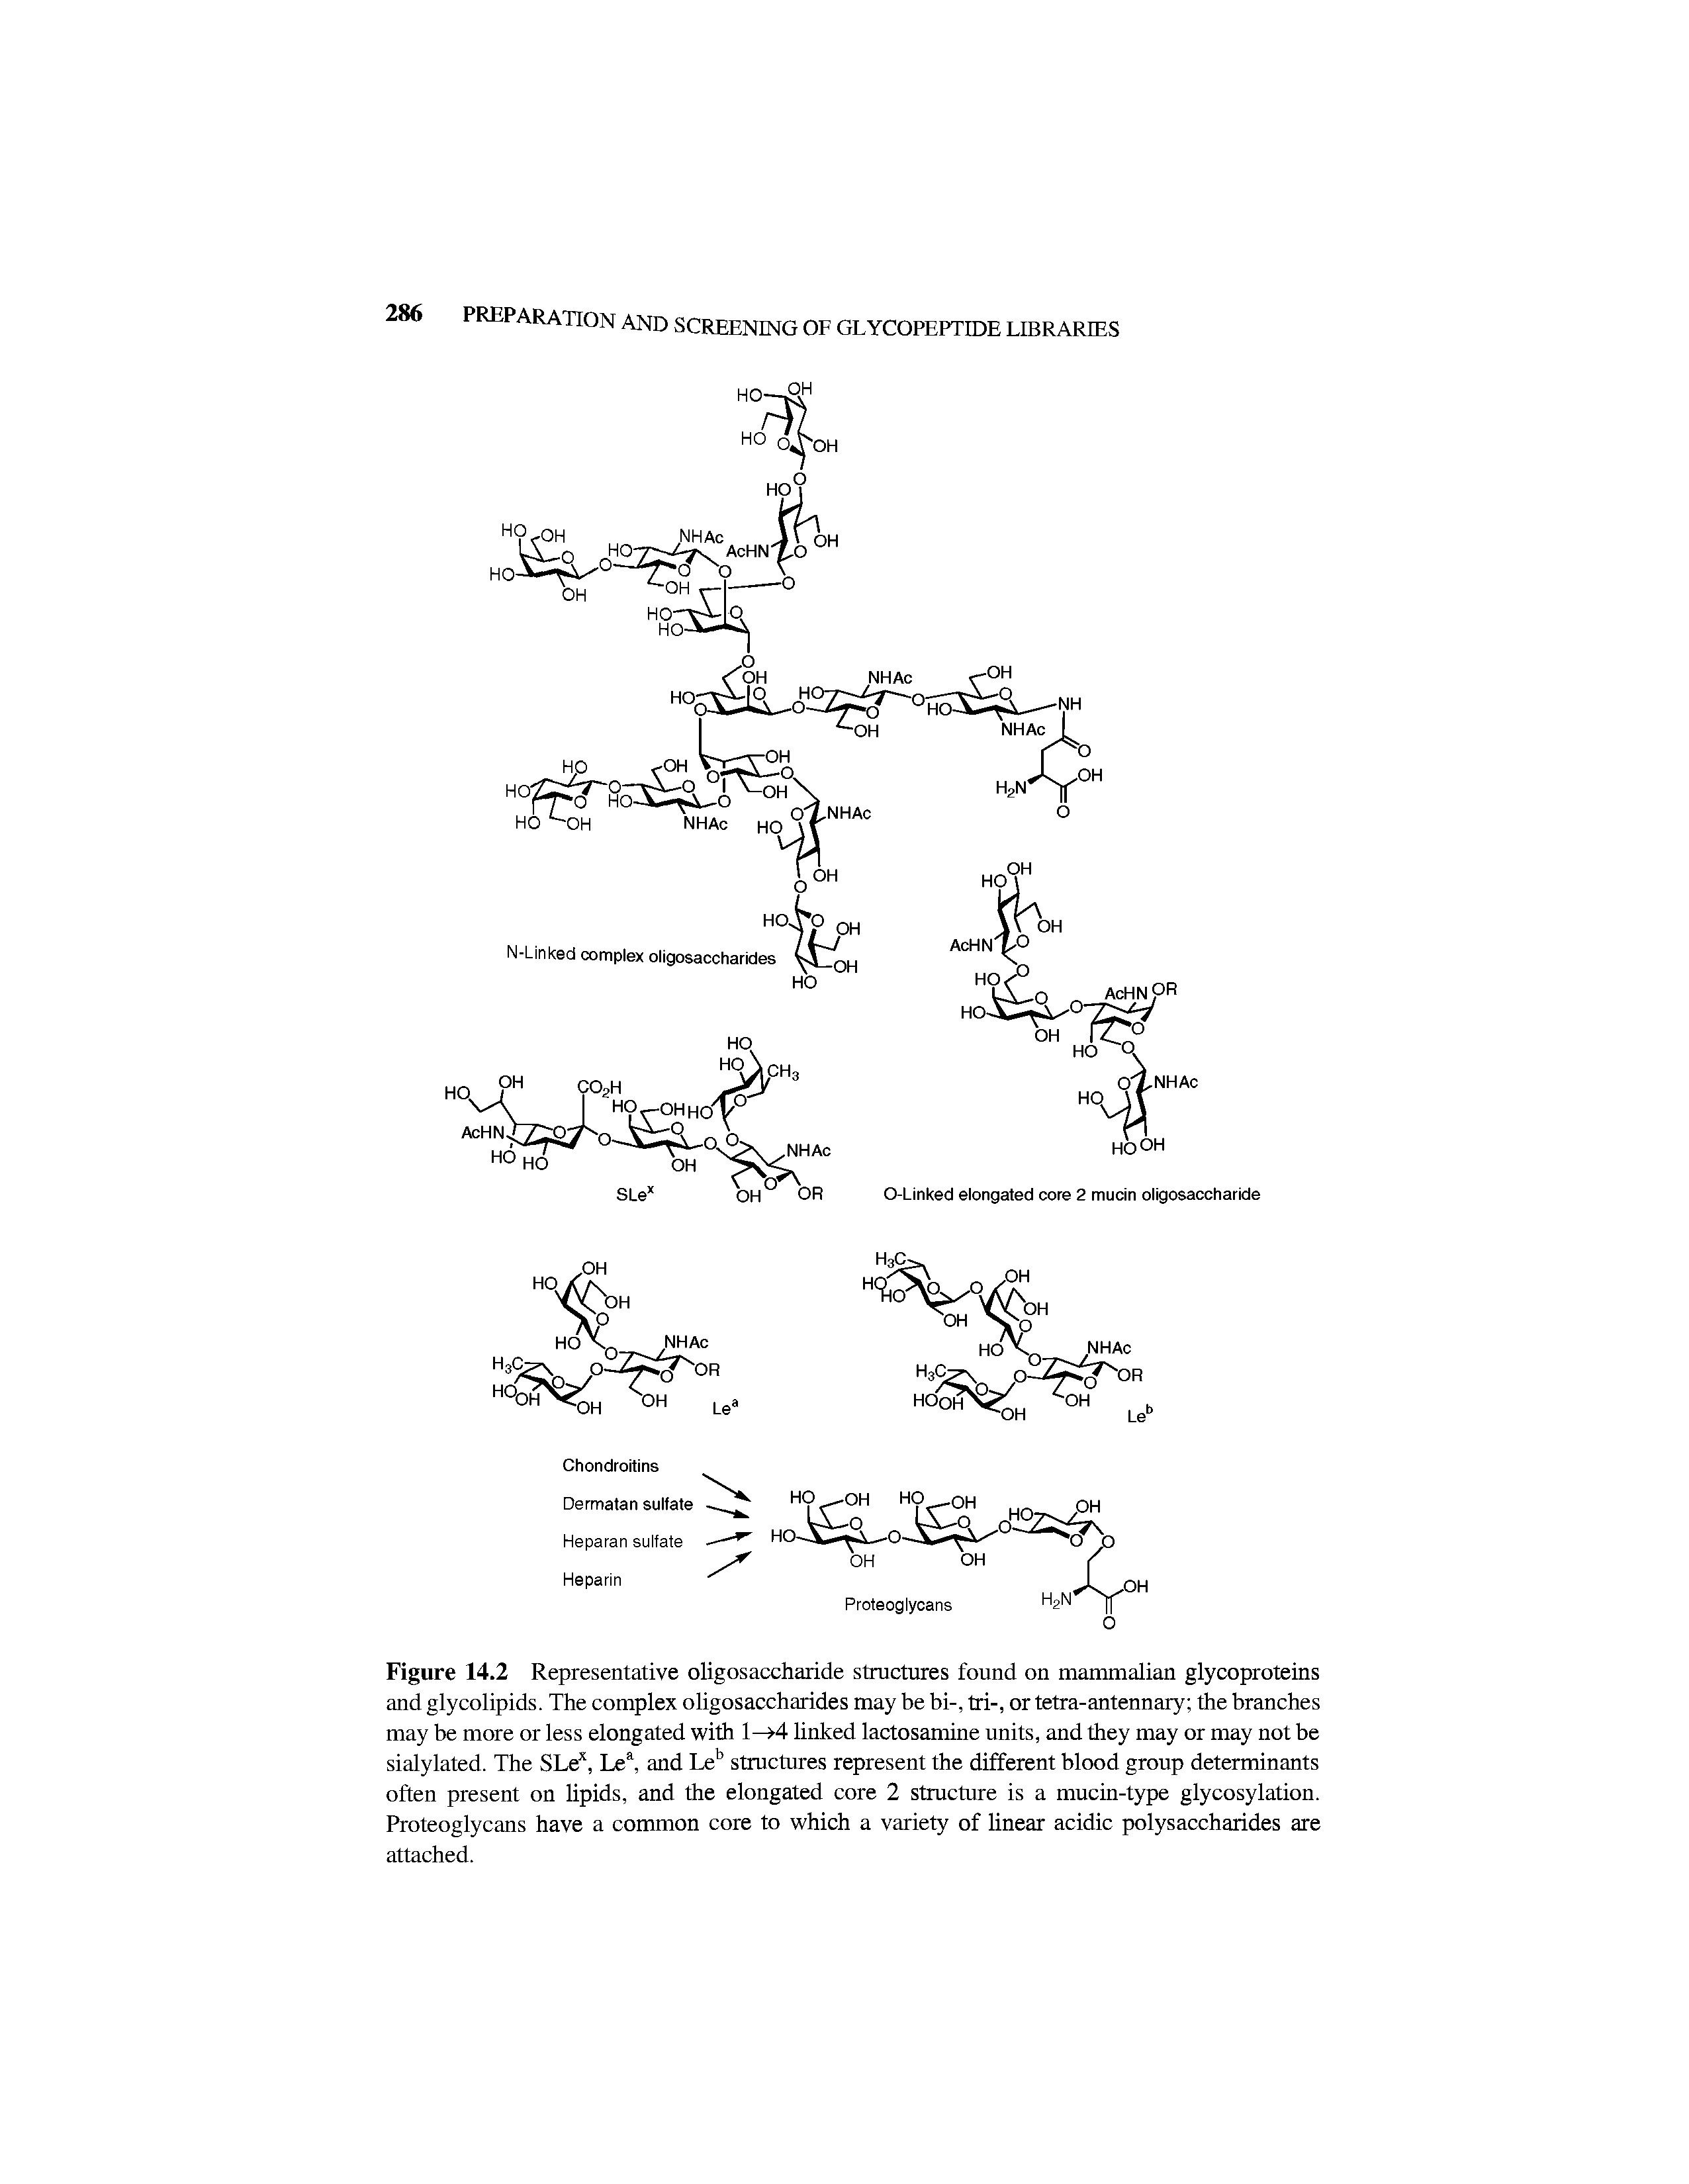 Figure 14.2 Representative oligosaccharide structures found on mammalian glycoproteins and glycolipids. The complex oligosaccharides may be bi-, tri-, or tetra-antennary the branches may be more or less elongated with 1—>4 linked lactosamine units, and they may or may not be sialylated. The SLex, Lea, and Leb structures represent the different blood group determinants often present on lipids, and the elongated core 2 structure is a mucin-type glycosylation. Proteoglycans have a common core to which a variety of linear acidic polysaccharides are attached.